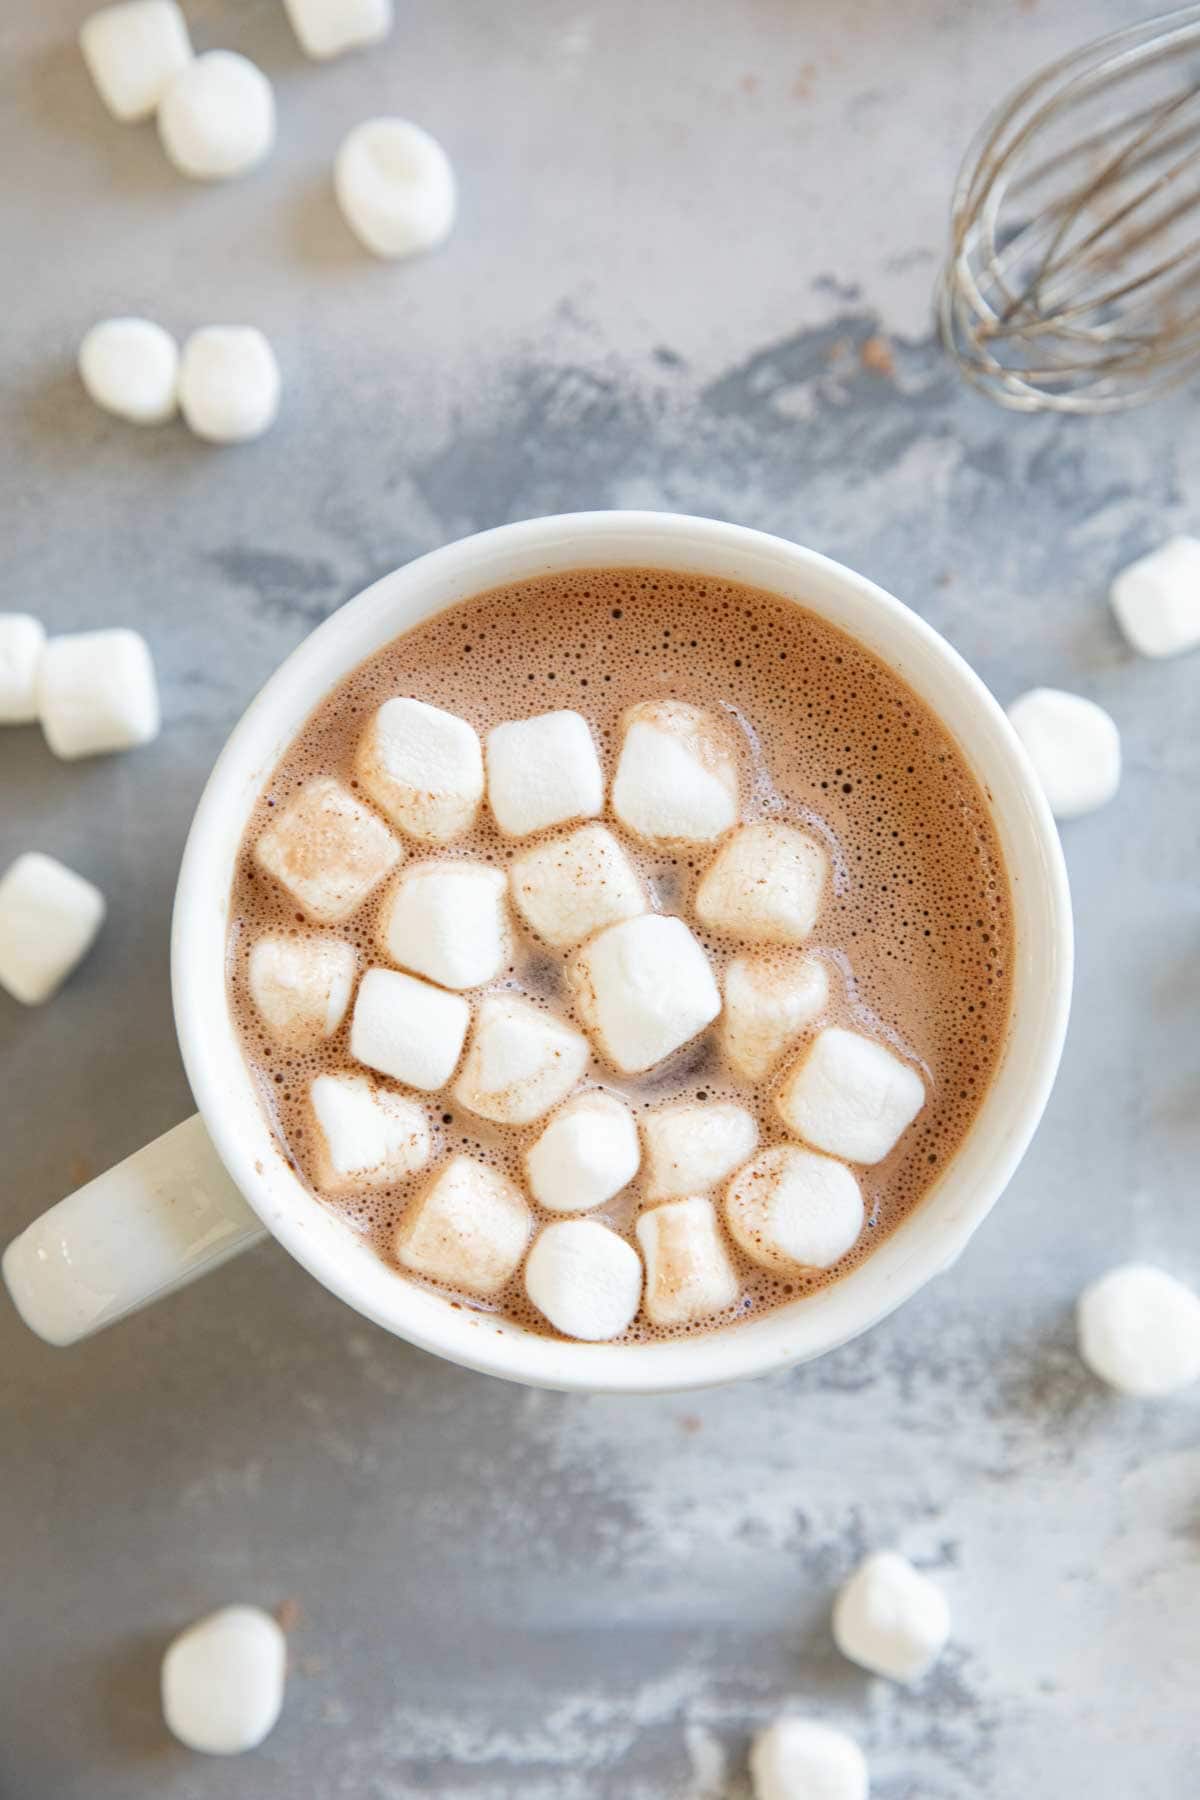 Hot chocolate made with Homemade Hot Chocolate Mix topped with marshmallows.